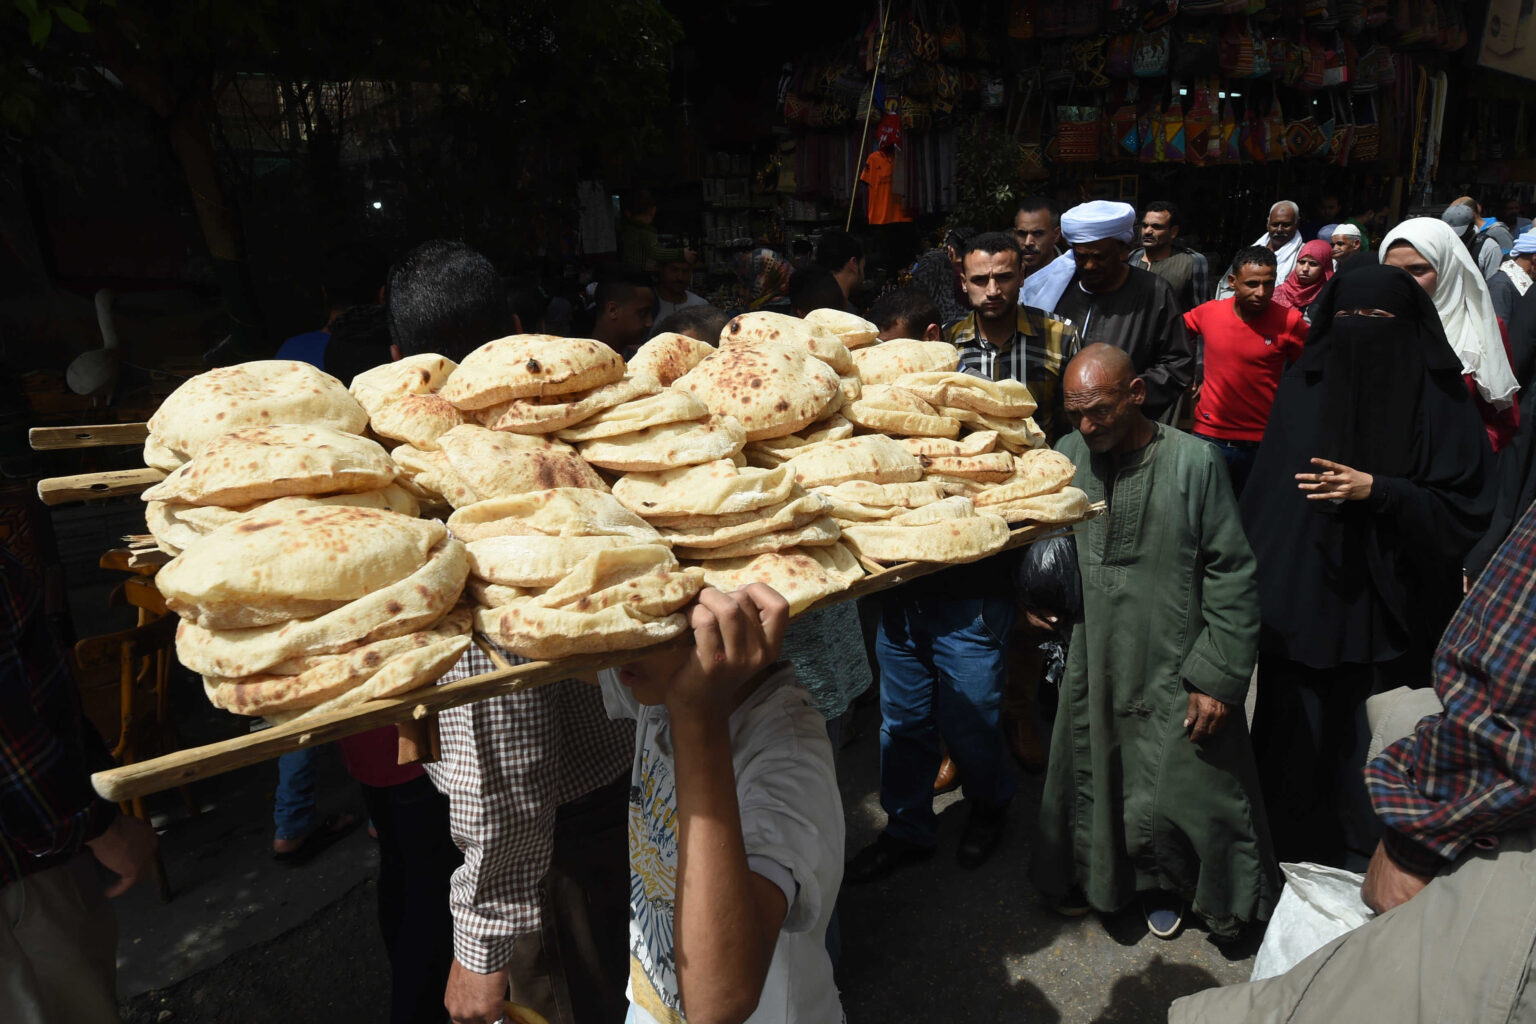 Egypt released new data on food reserves. The country said it has amounts enough for 4-6 months.